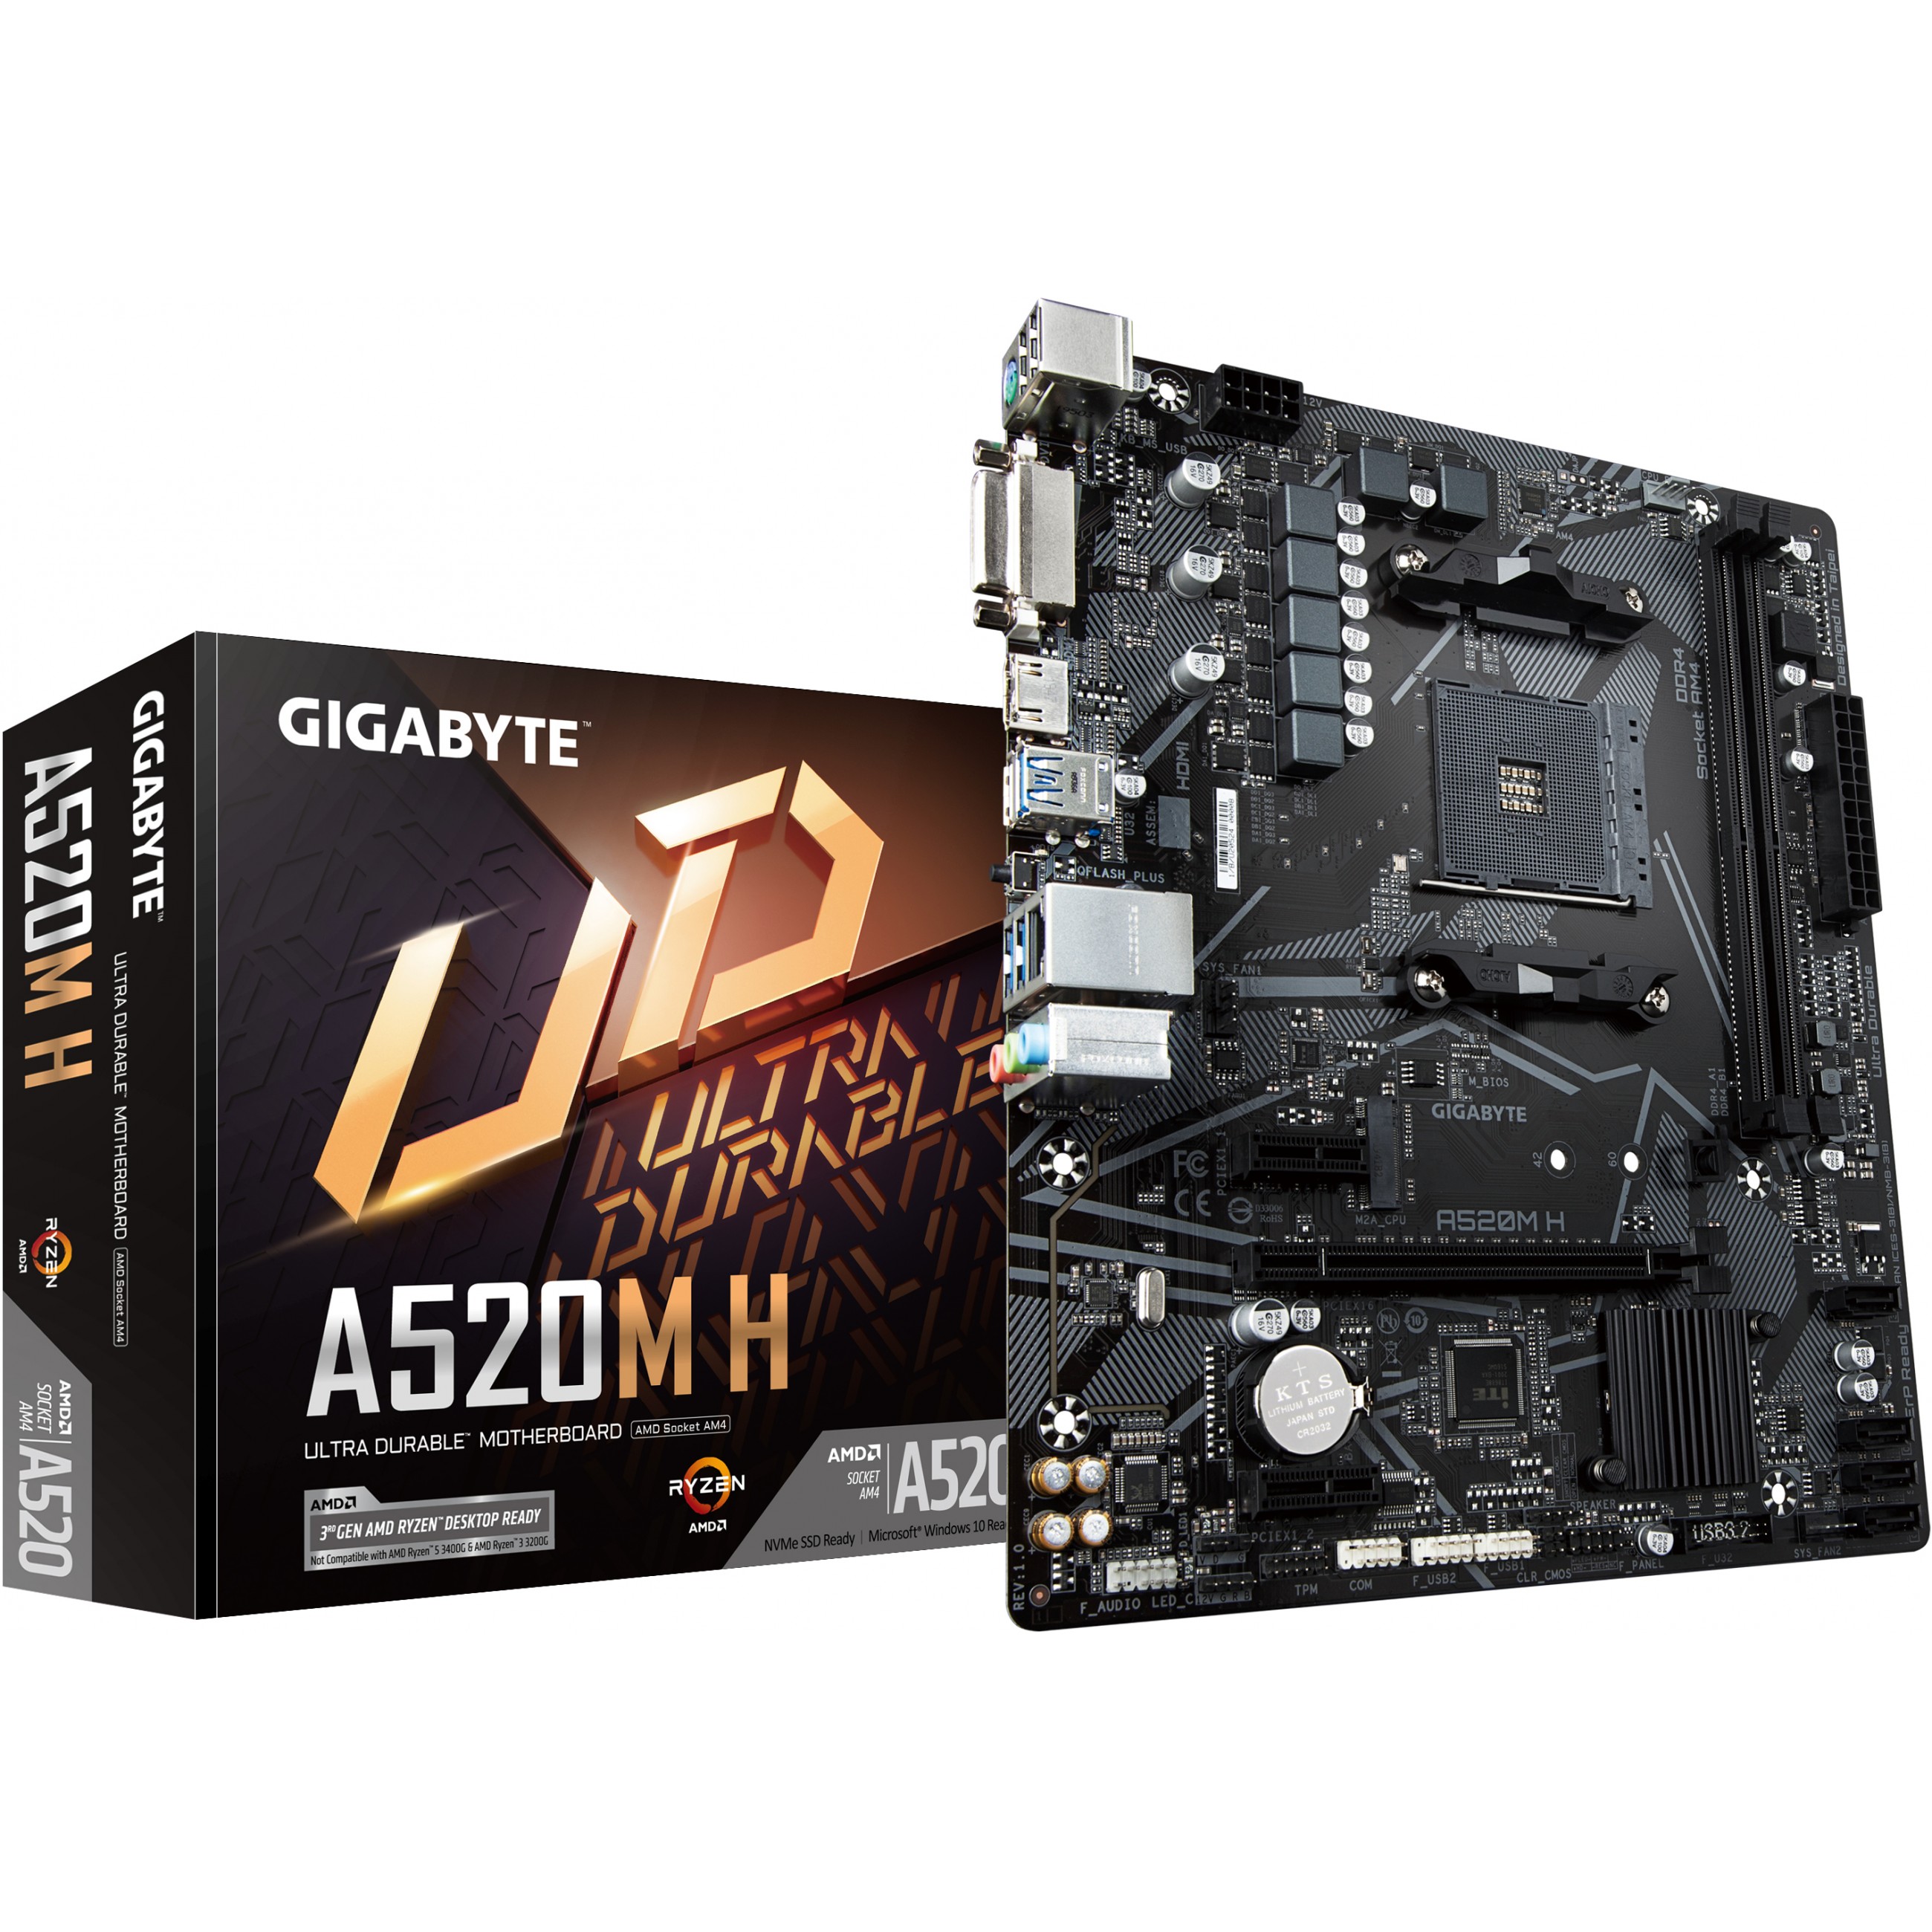 Gigabyte A520M H motherboard - A520M H